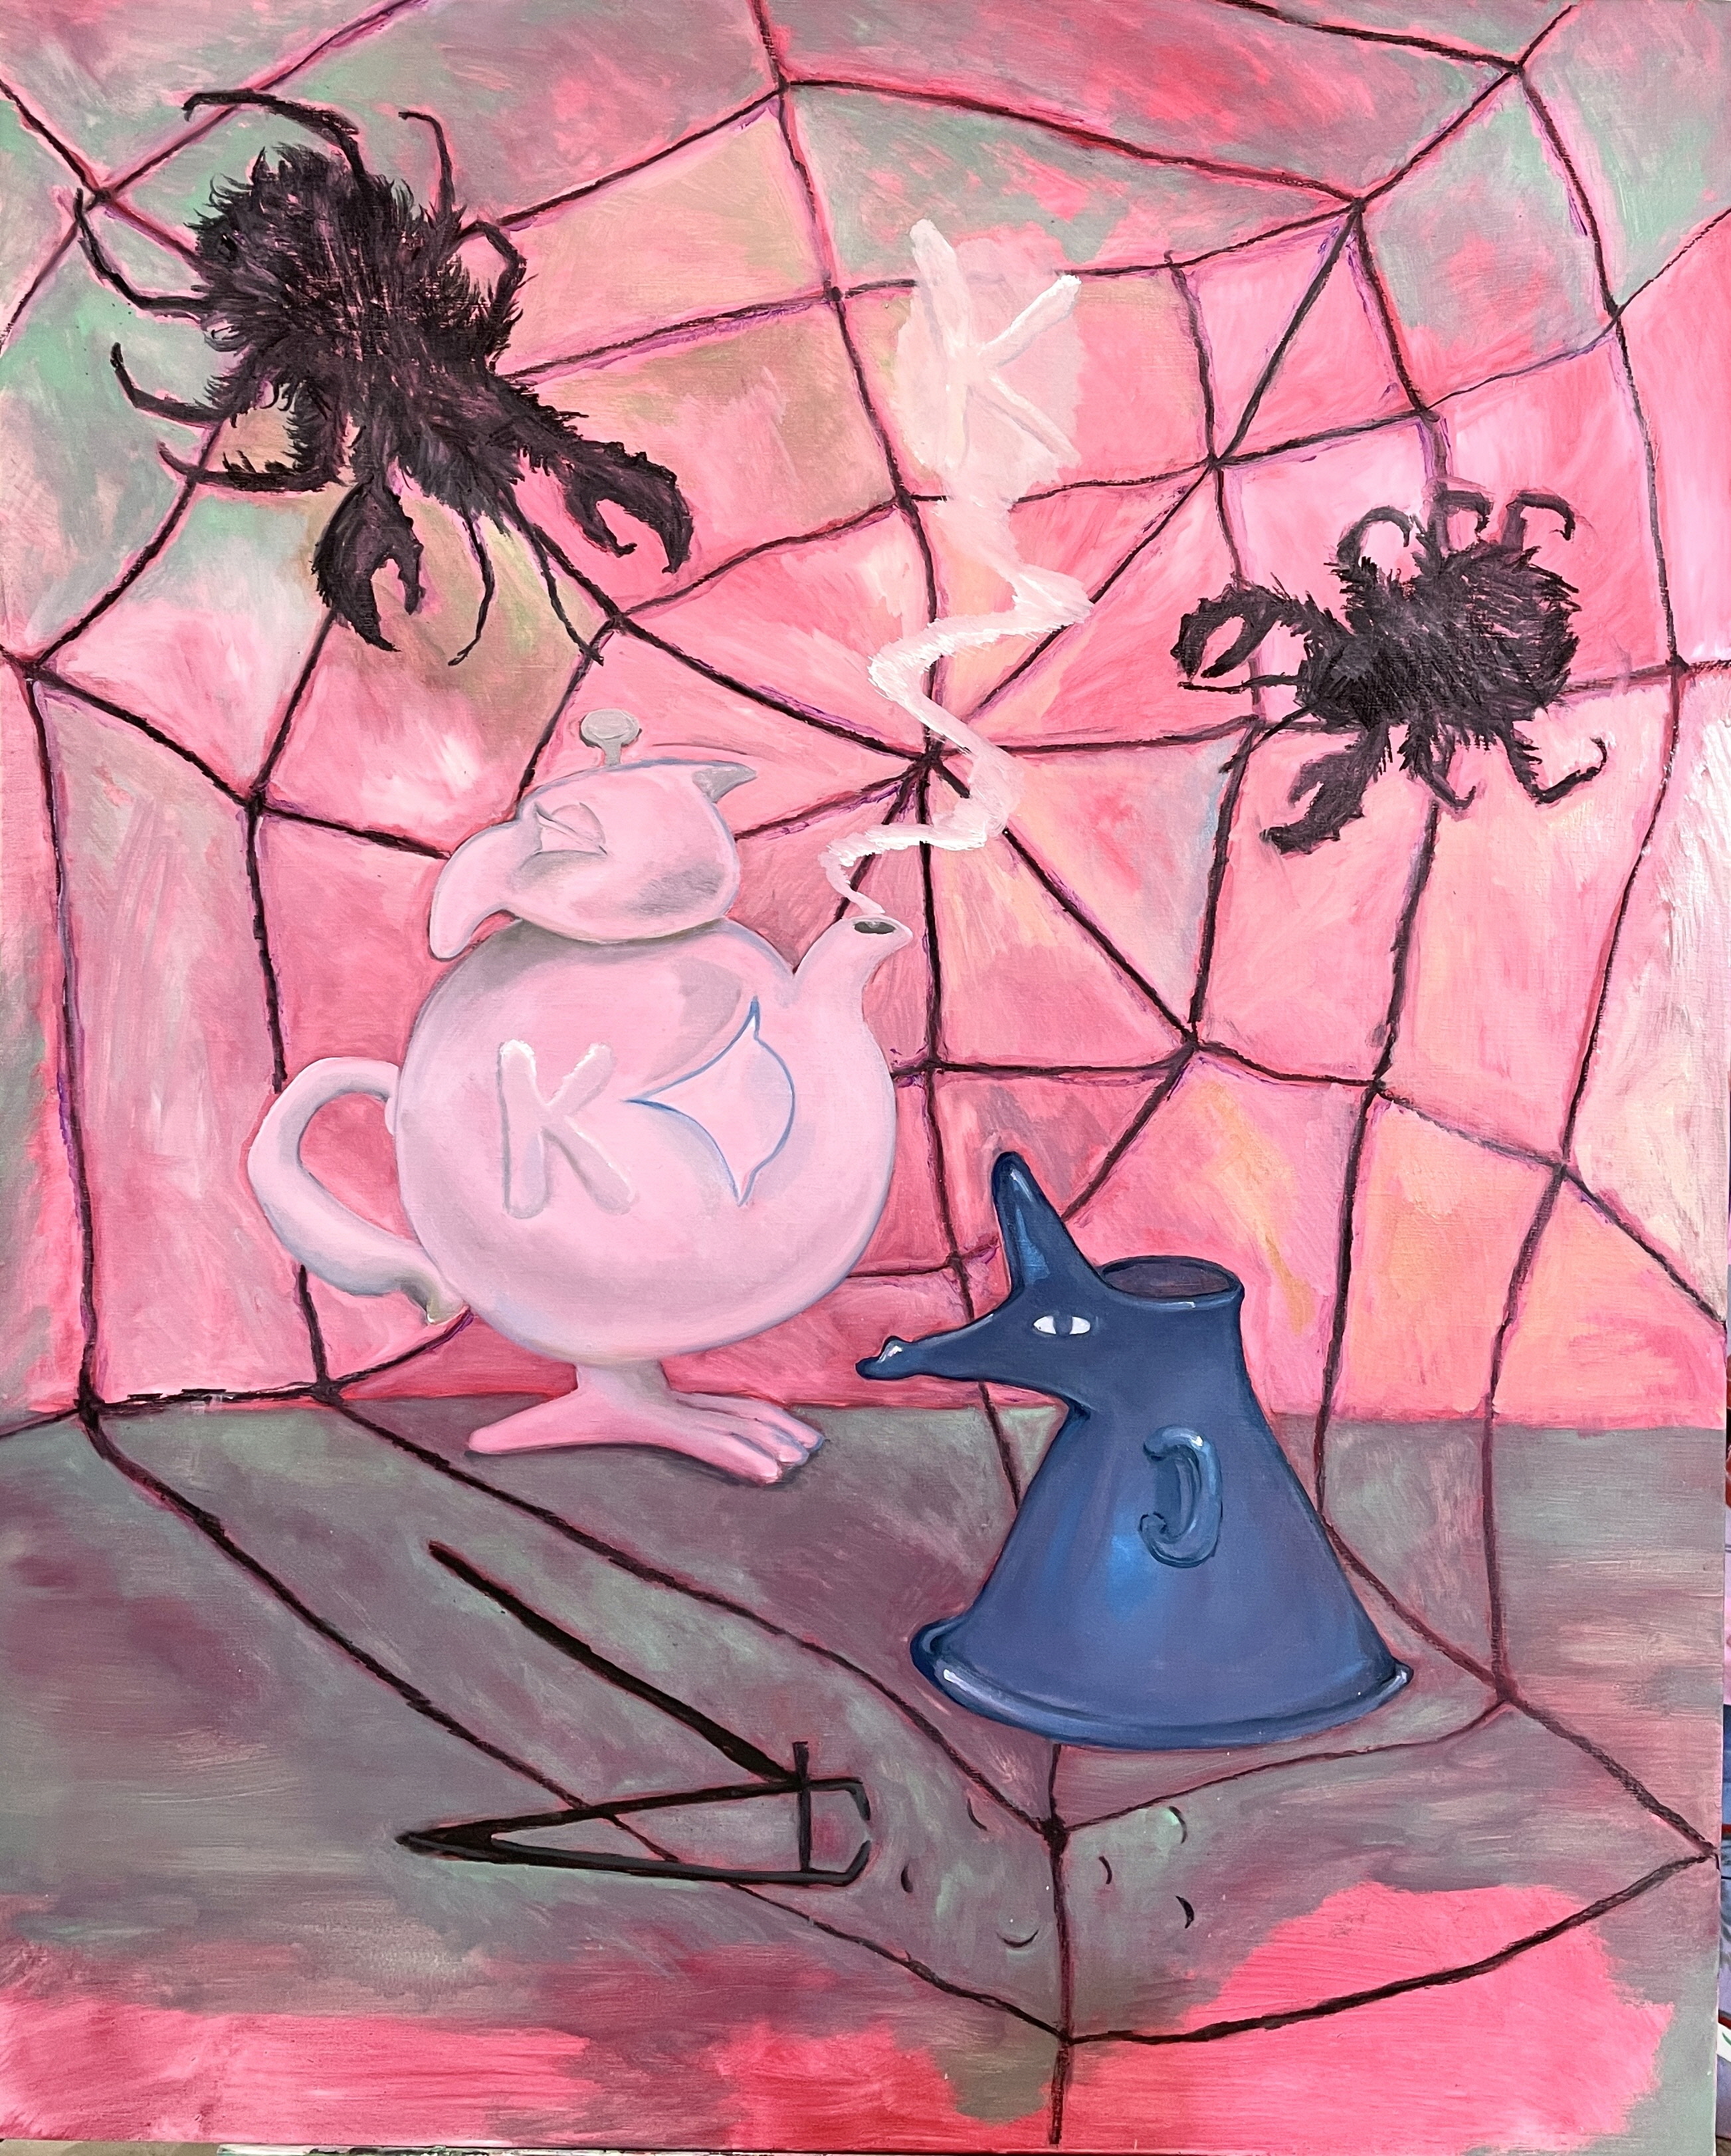  K-pot Party and the Friends, Oil and Charcoal on Canvas, 100x80.3cm, 2021